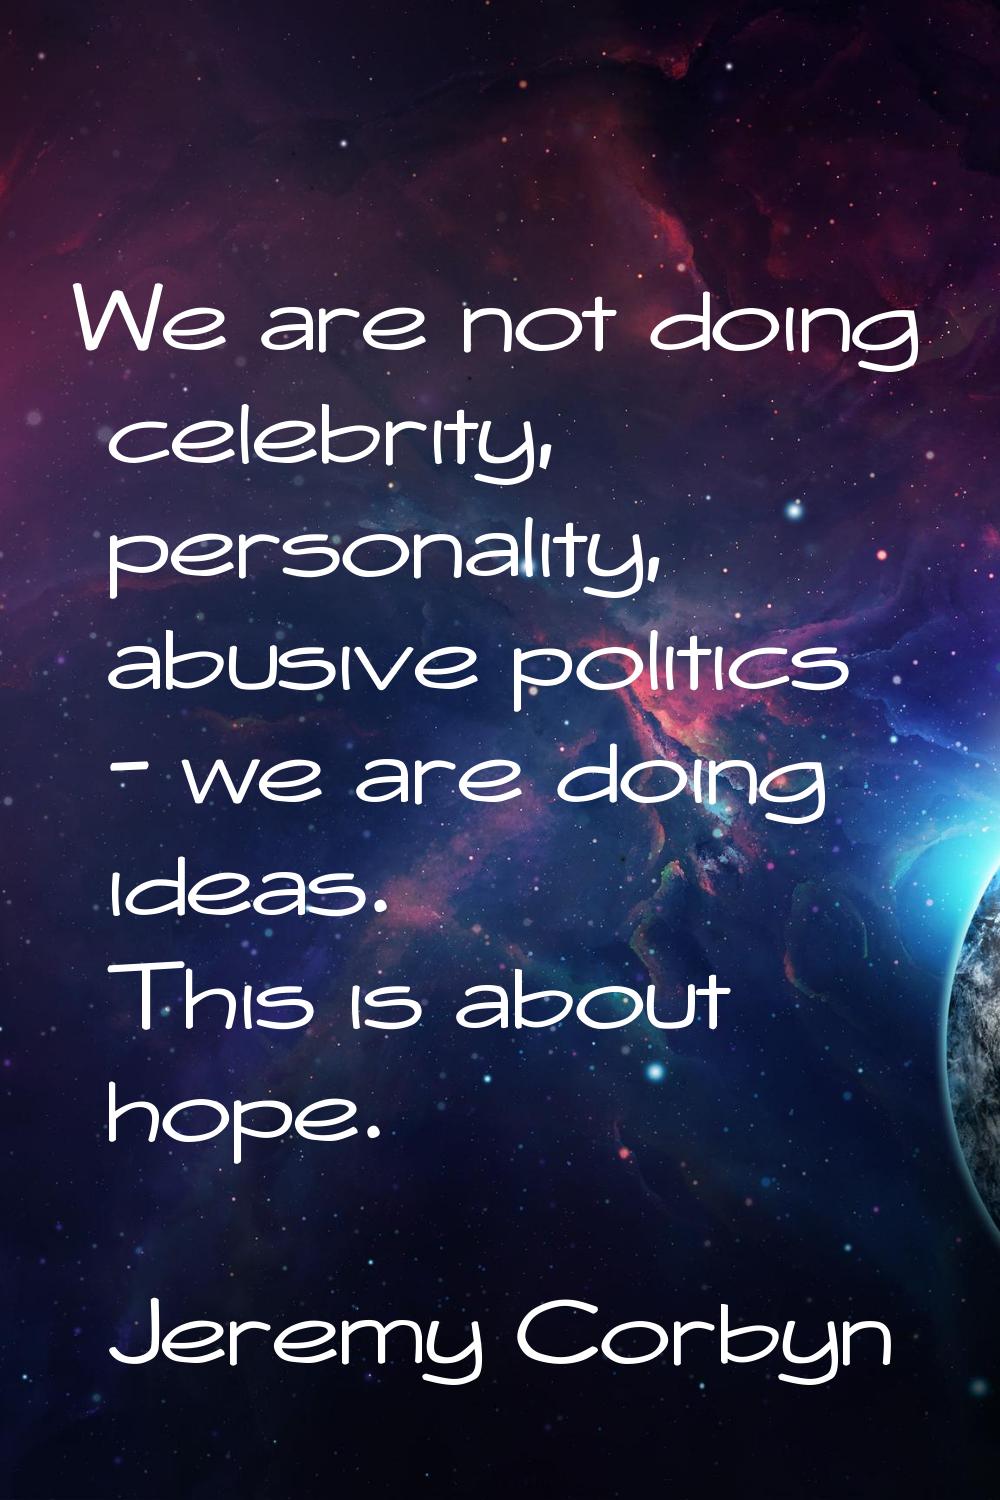 We are not doing celebrity, personality, abusive politics - we are doing ideas. This is about hope.